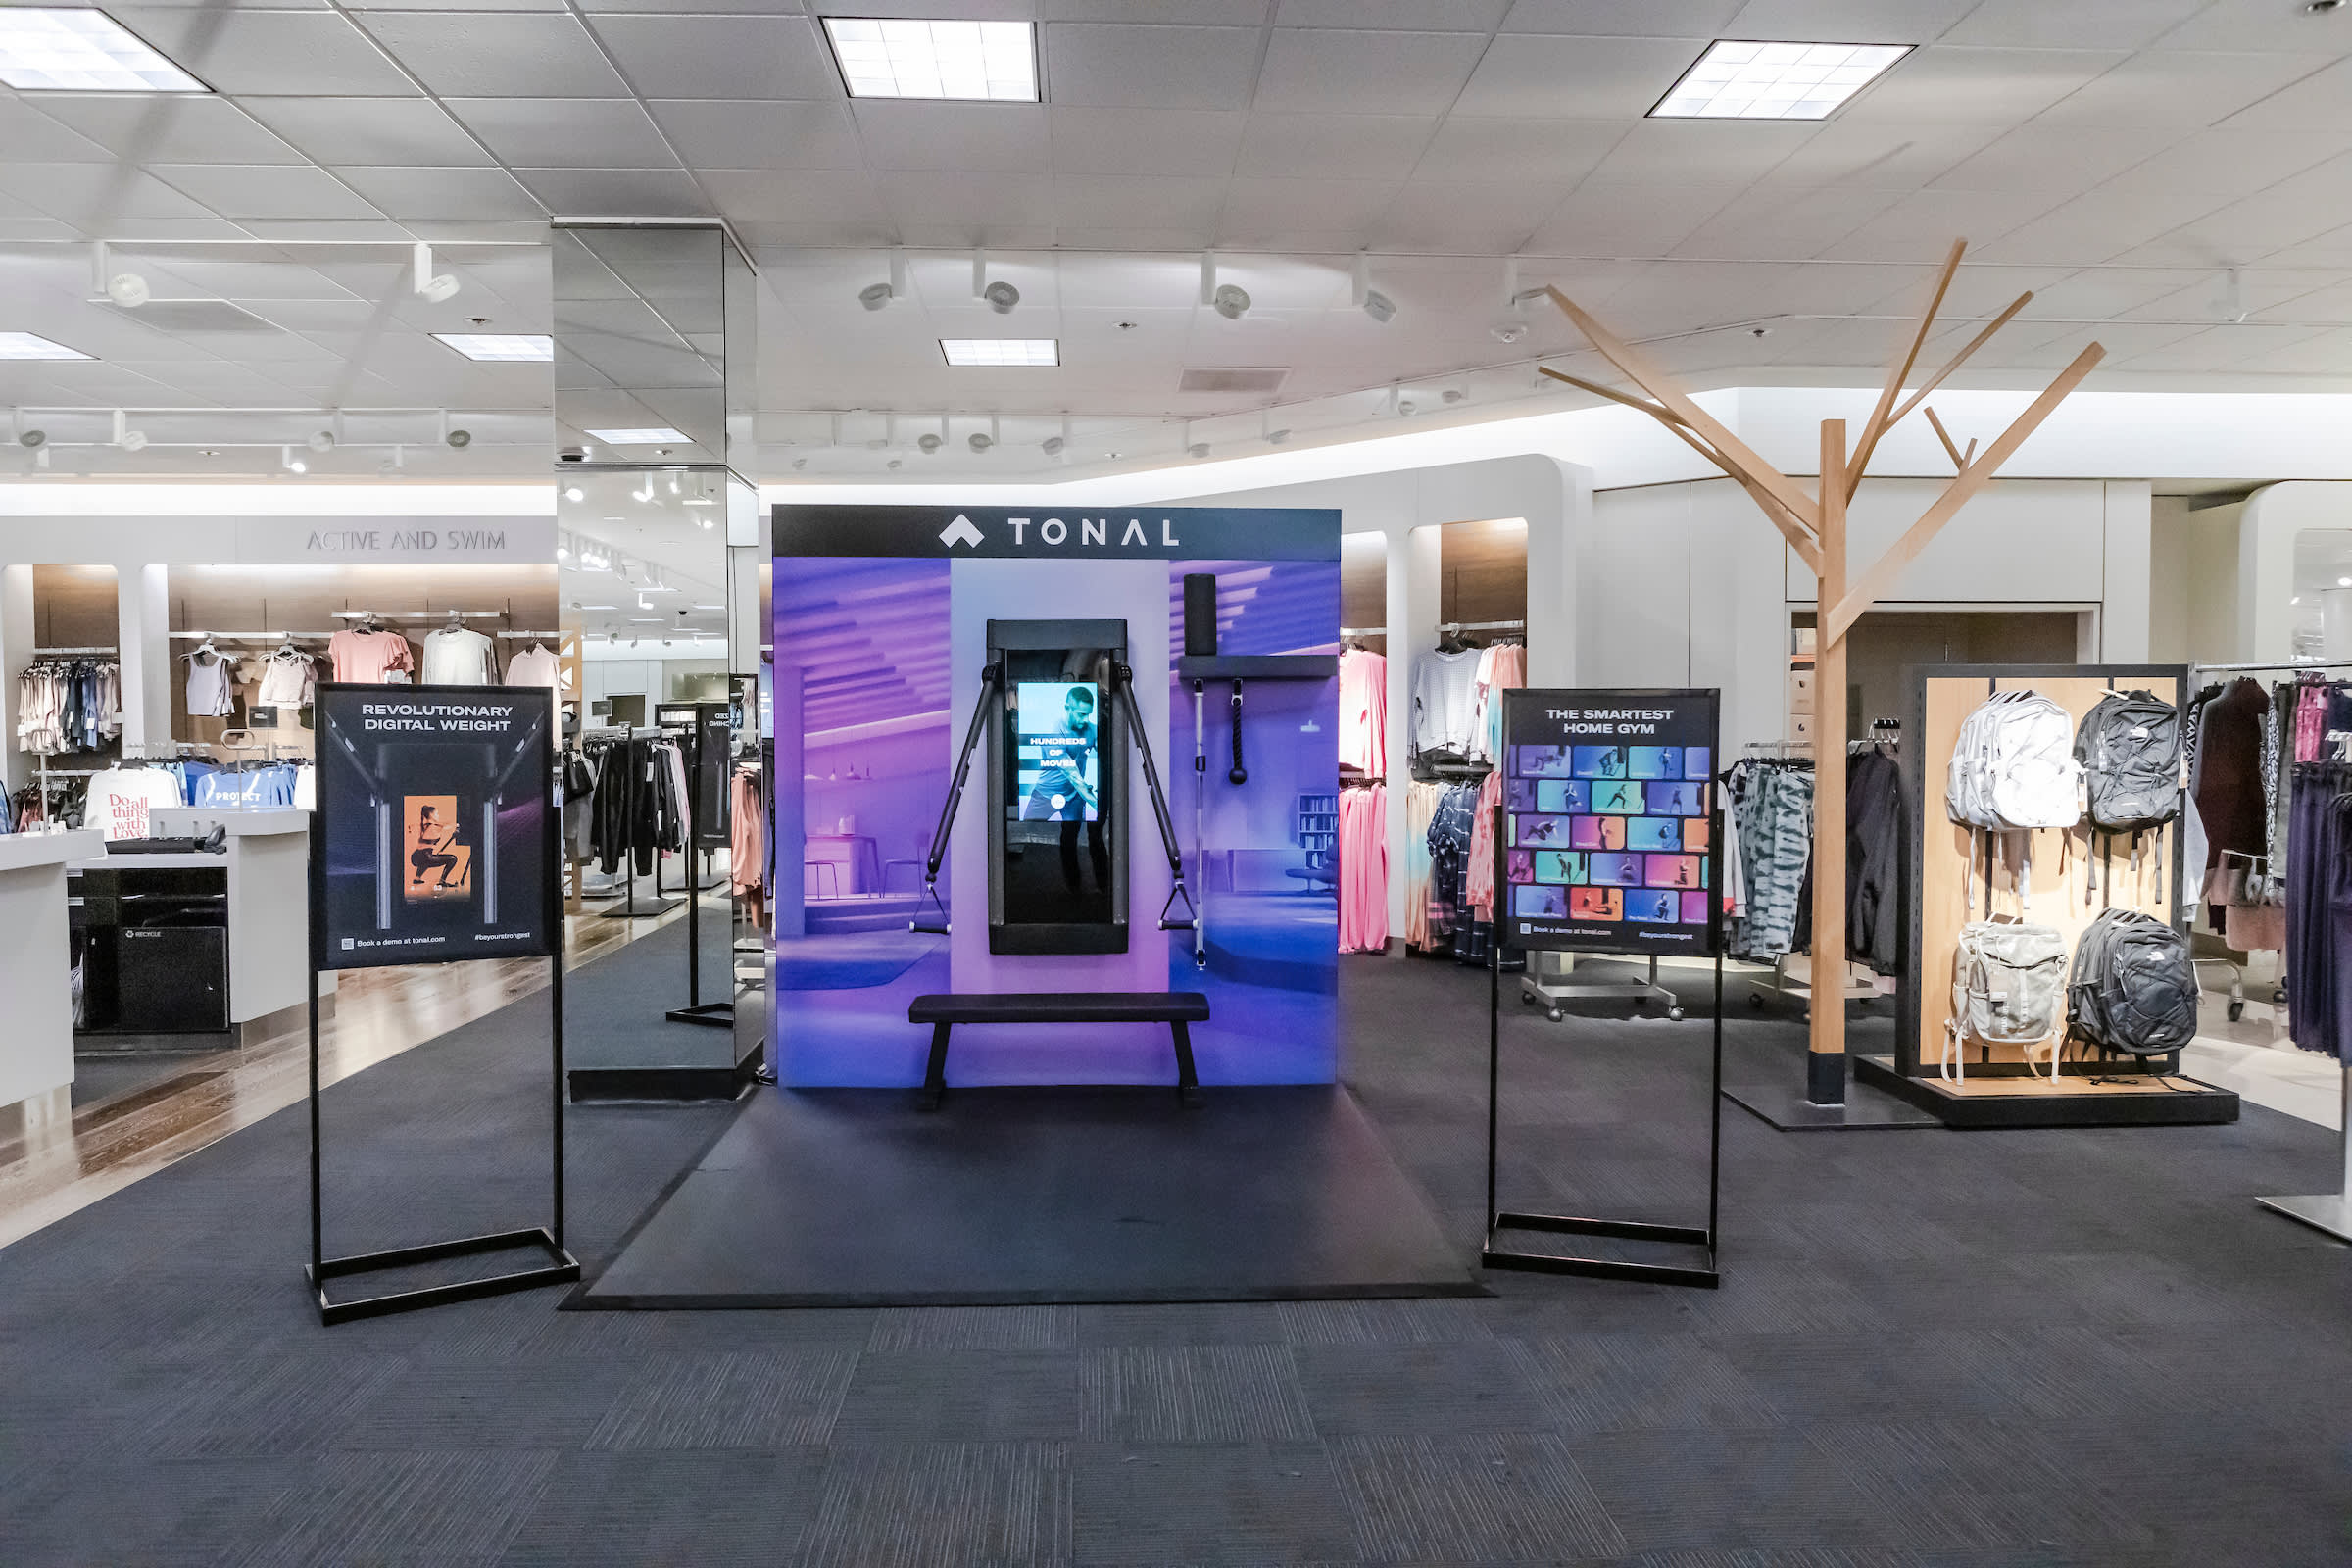 Nordstrom to add Tonal shops in 40 